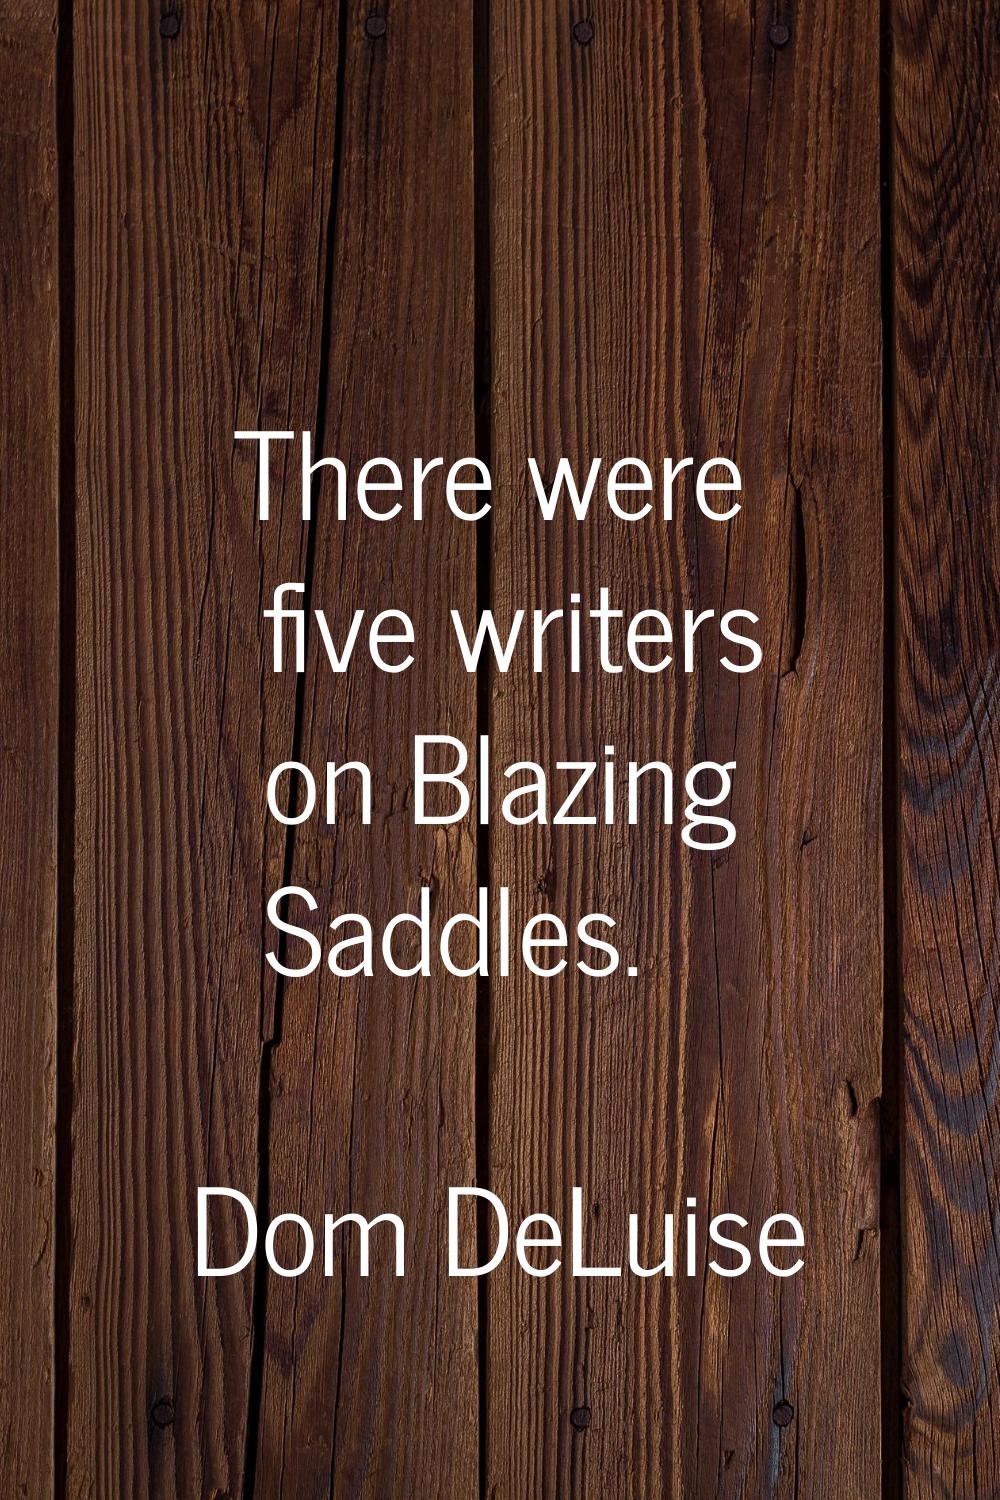 There were five writers on Blazing Saddles.